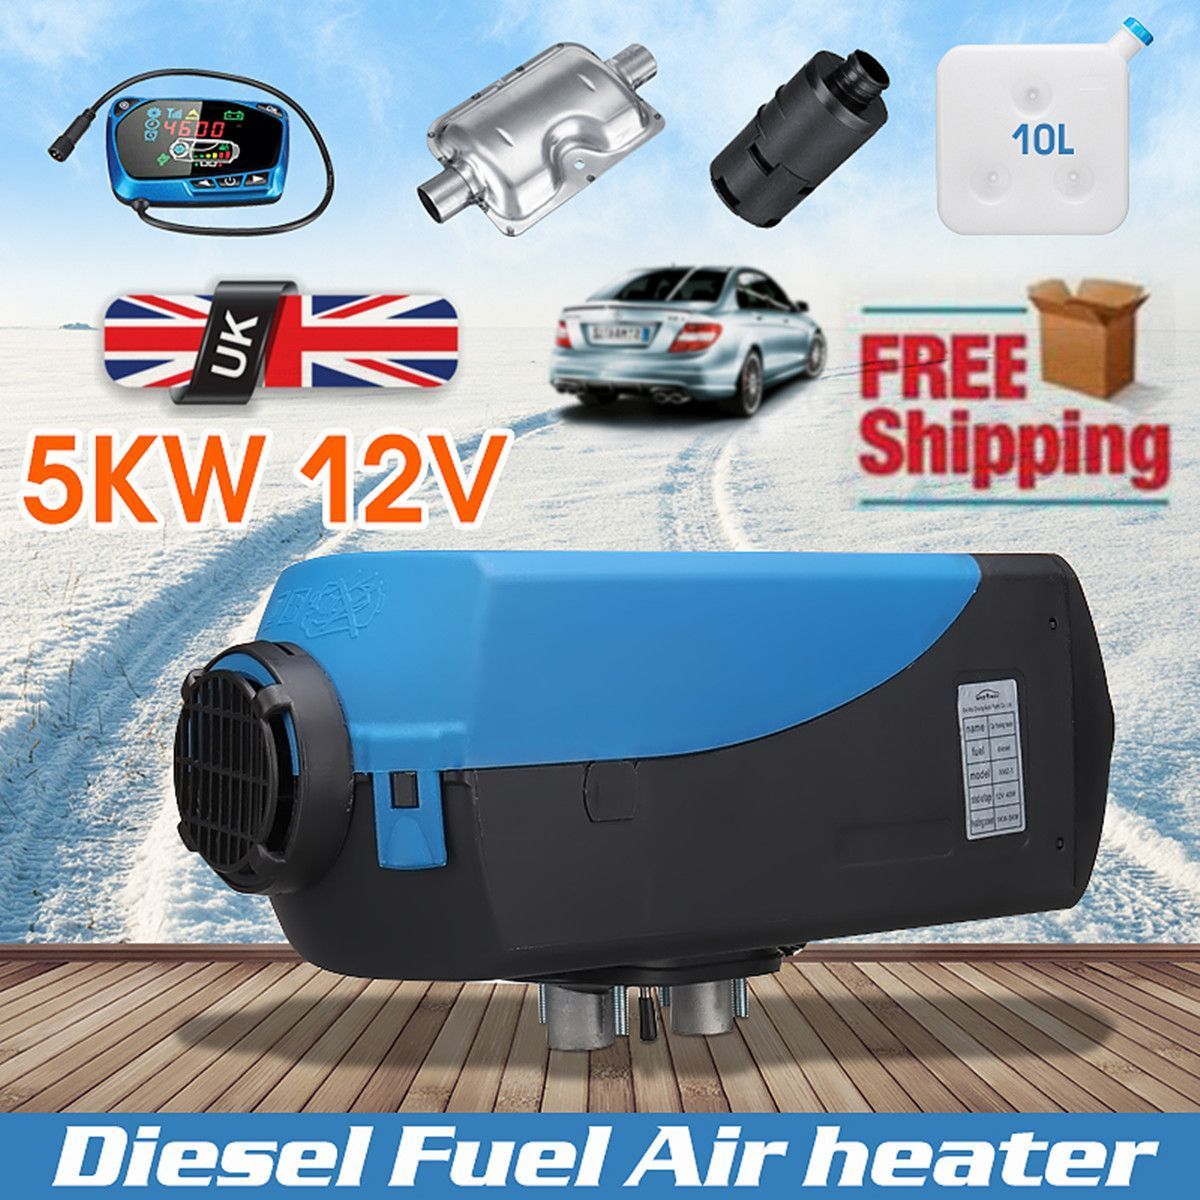 Air-Diesel-Fuel-Heater-5KW-12V-Vehicle-Heater-LCD-DynamicThermostat-Parking-Heater-1371407